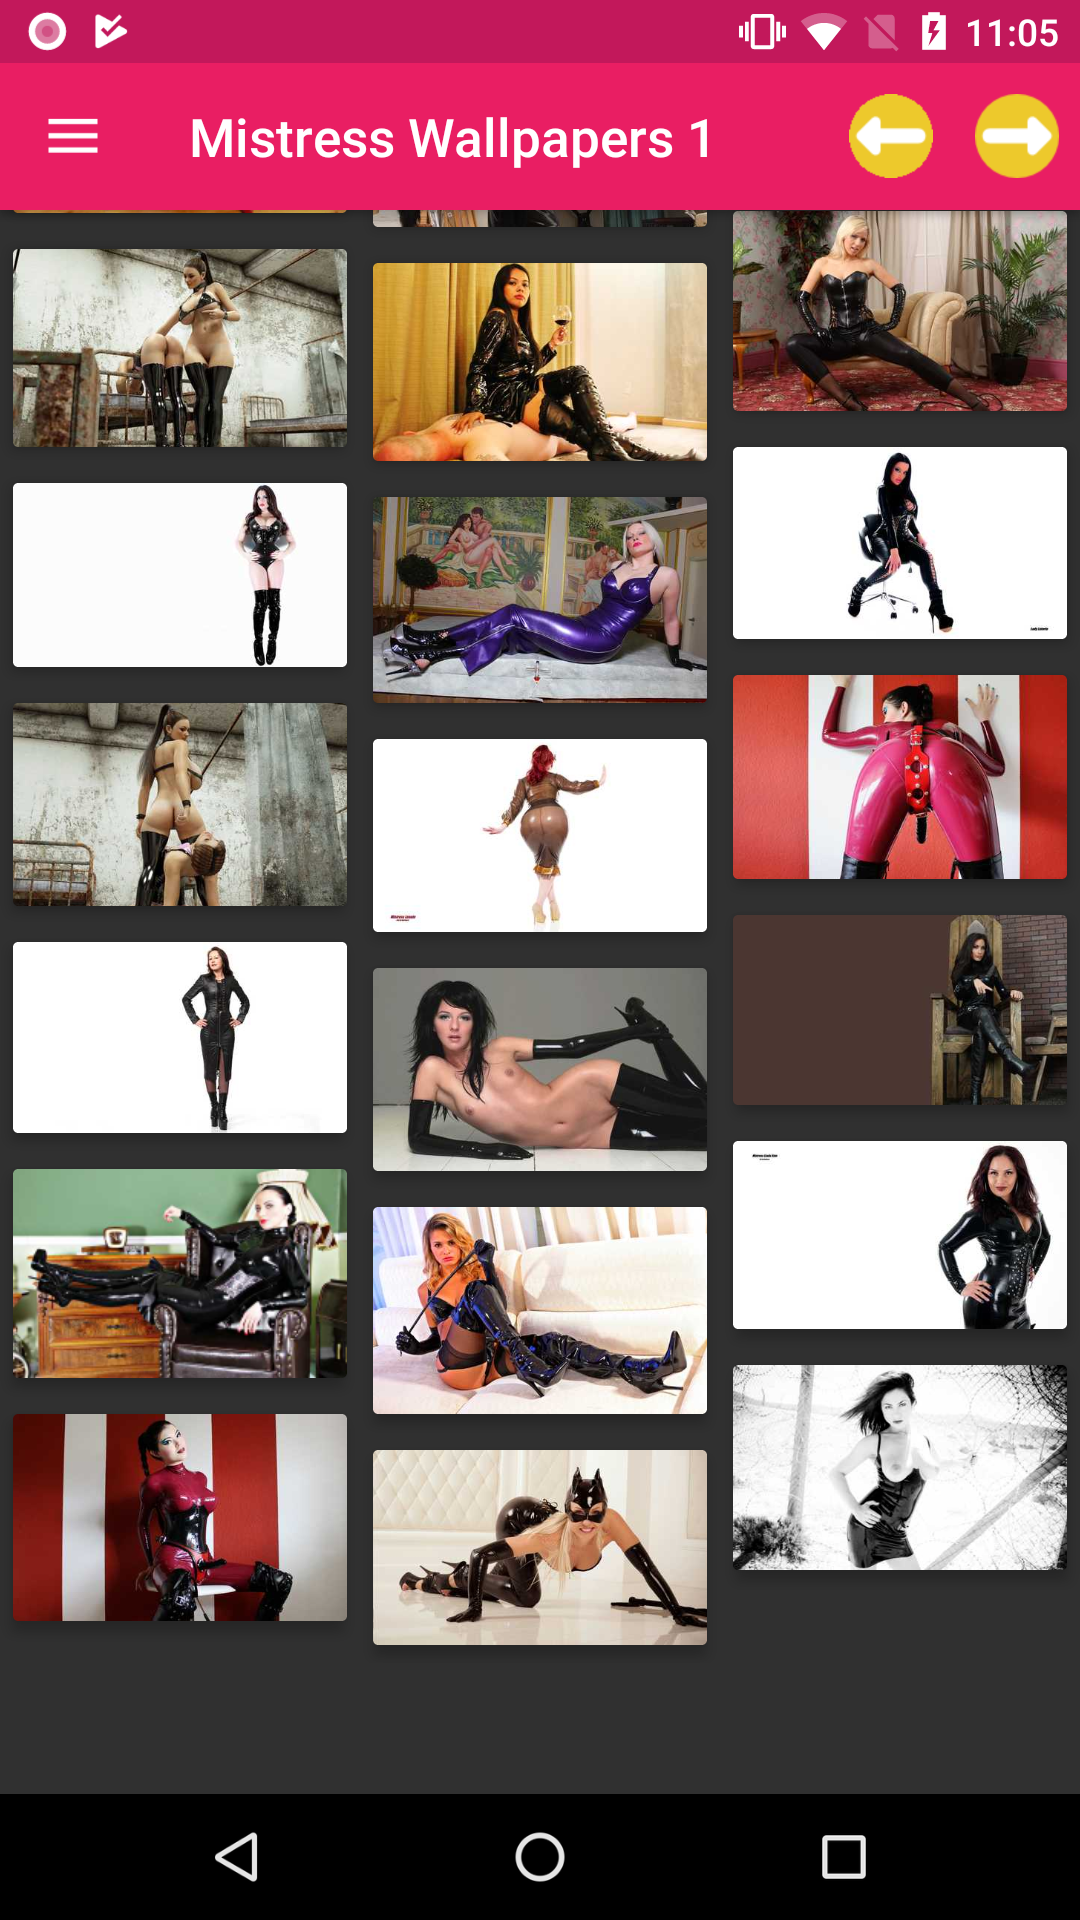 Mistress Wallpapers app,femdom,mistress,wallpaper,femboy,latex,application,erotic,shemales,pornstar,perfect,pics,hentai,apk,sexy,apps,bdsm,domination,porn,mobile,wallpapers,download,anime